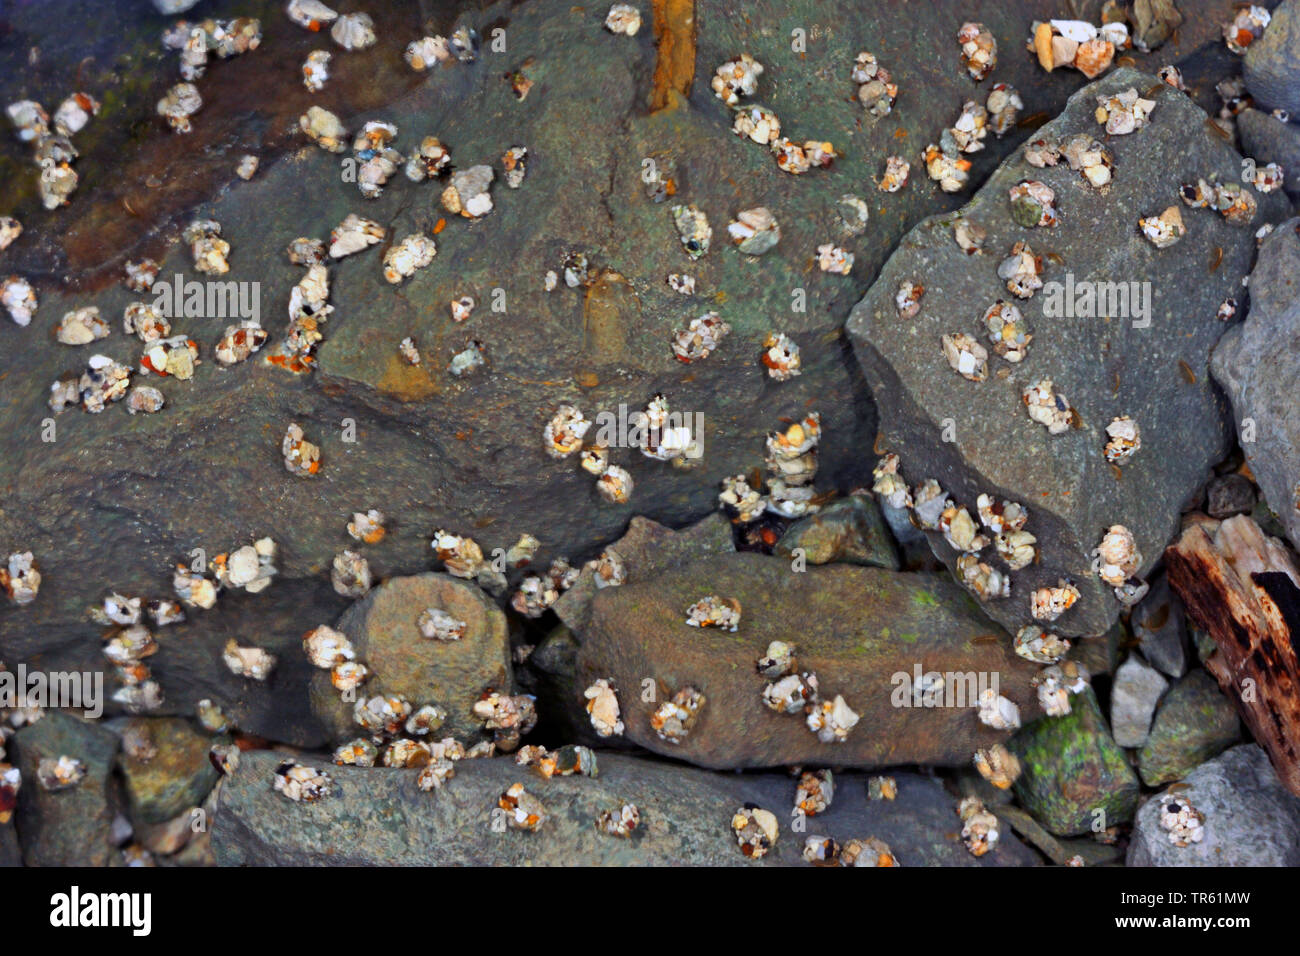 caddisfly (Agapetus fuscipes), larvae in its cases on the bed of the stretch of the water, view from above, Germany Stock Photo